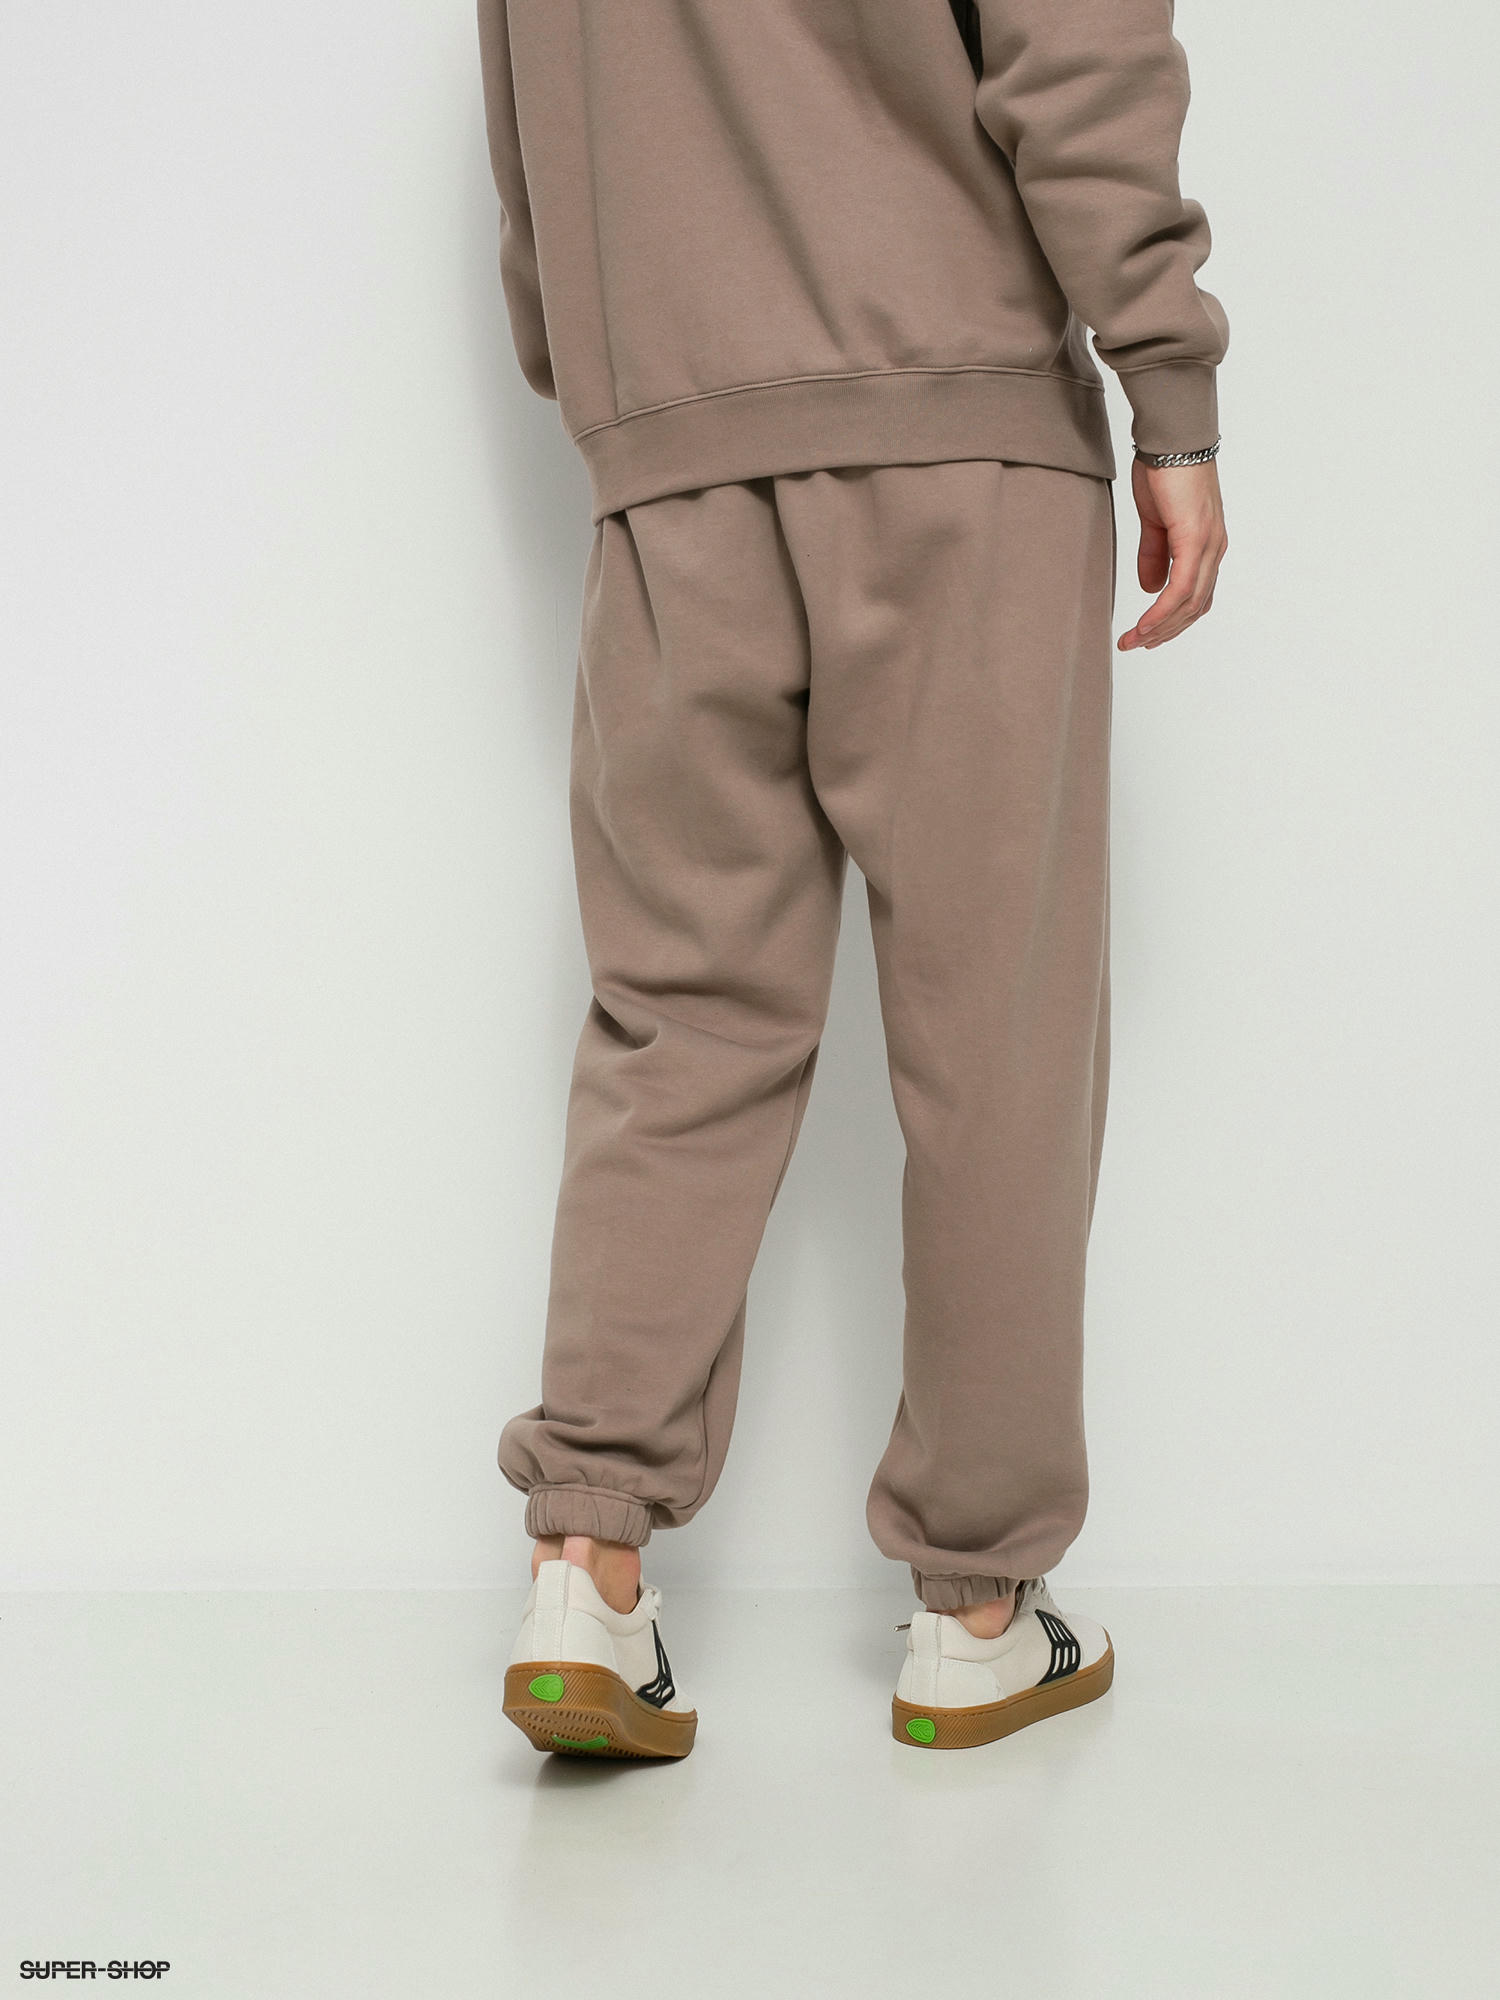 adidas Originals TRF Linear Pants (chalky brown)